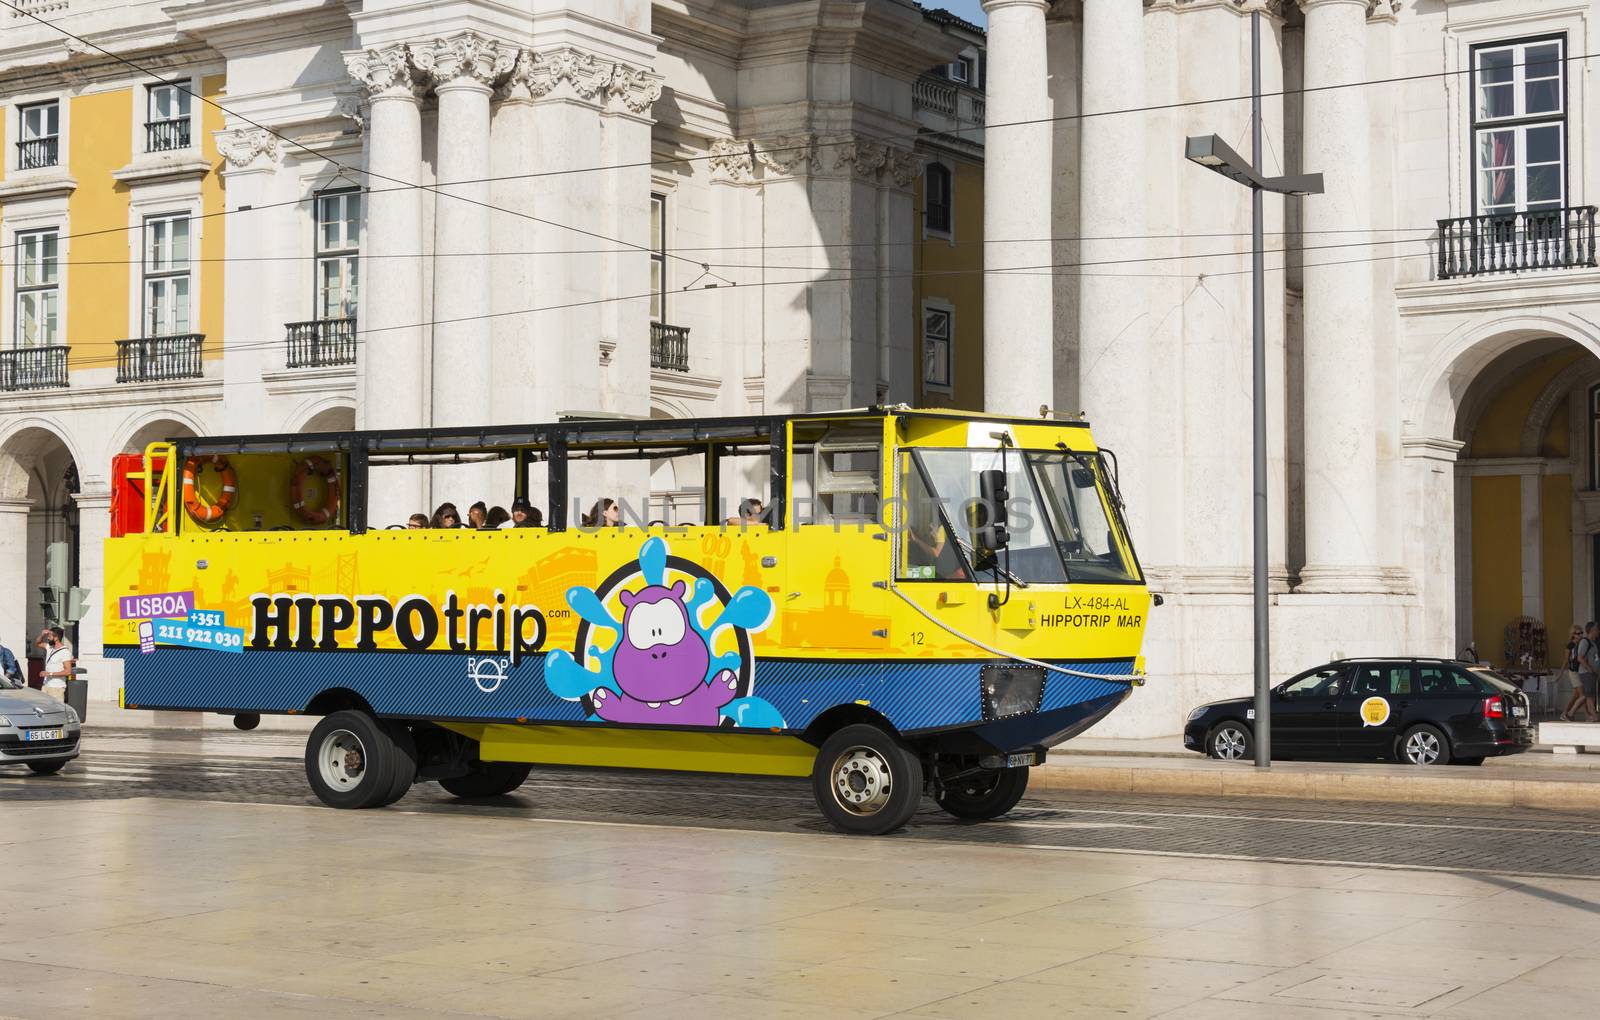 LISBON, PORTUGAL - SEPTEMBER 26, 2015: Sightseeing amphibian bus HIPPOtrip is crossing the streetsof Lissabon on n September 26, 2015. Lisbon is a capital and must famous city of Portugal